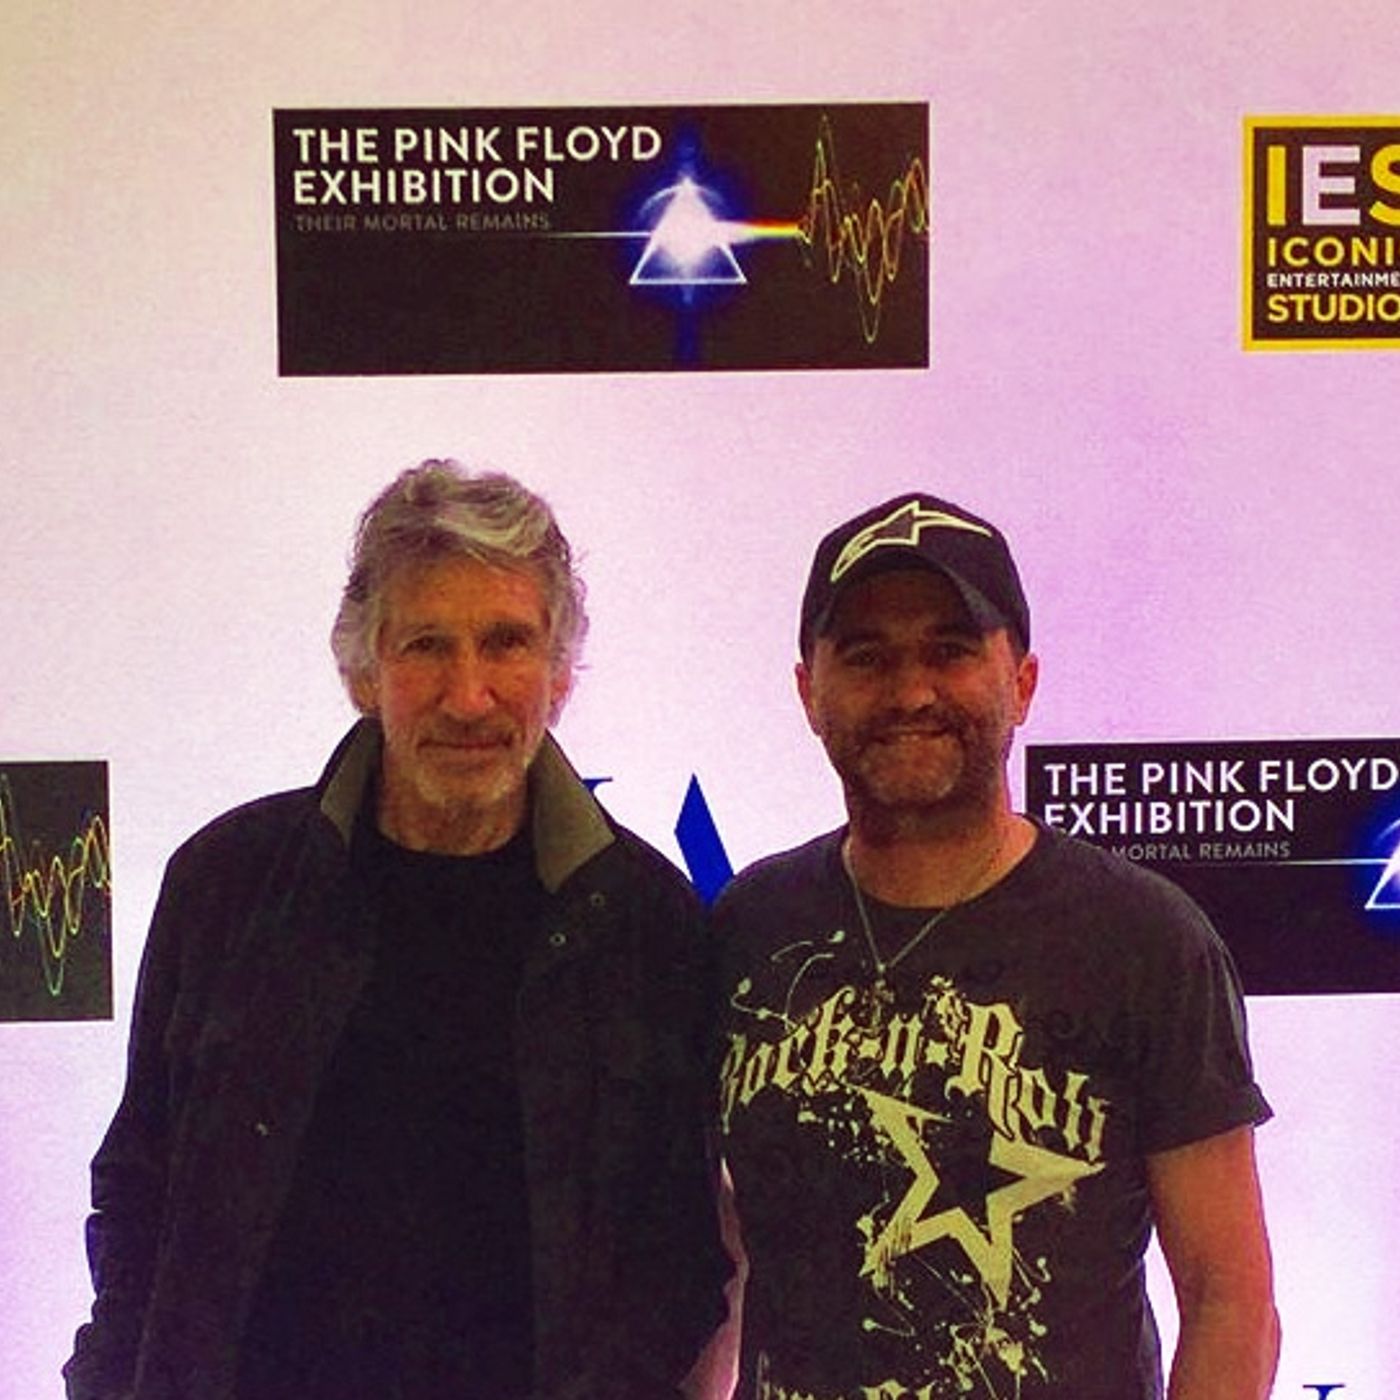 Roger Waters talks about The Pink Floyd Exhibition ’Their Mortal Remains’